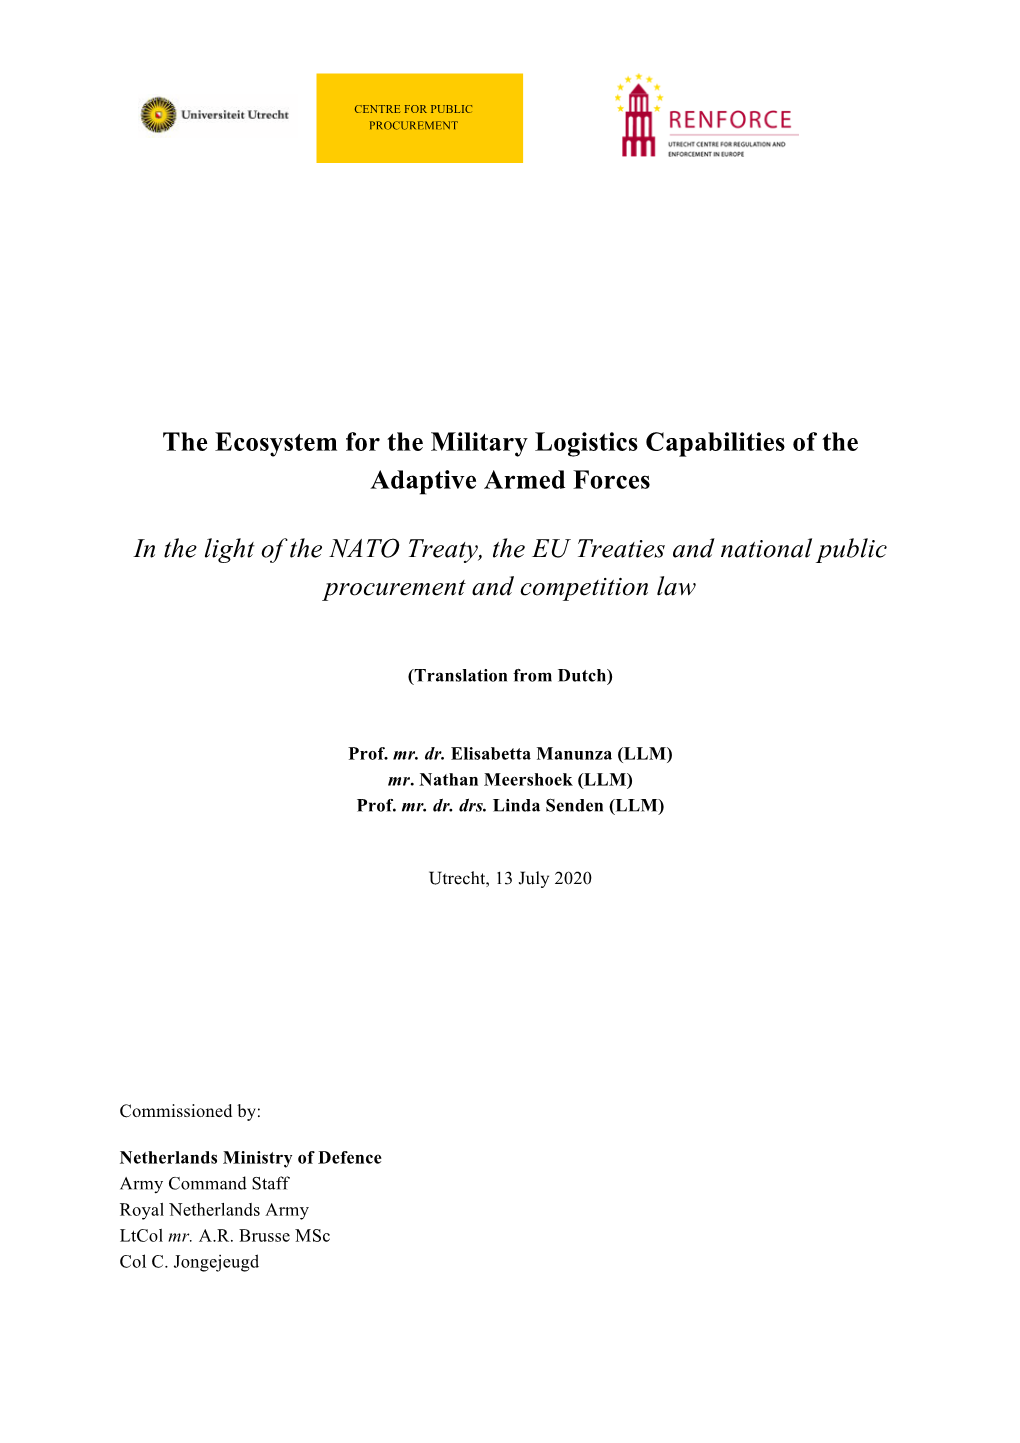 The Ecosystem for the Military Logistics Capabilities of the Adaptive Armed Forces in the Light of the NATO Treaty, the EU Treat